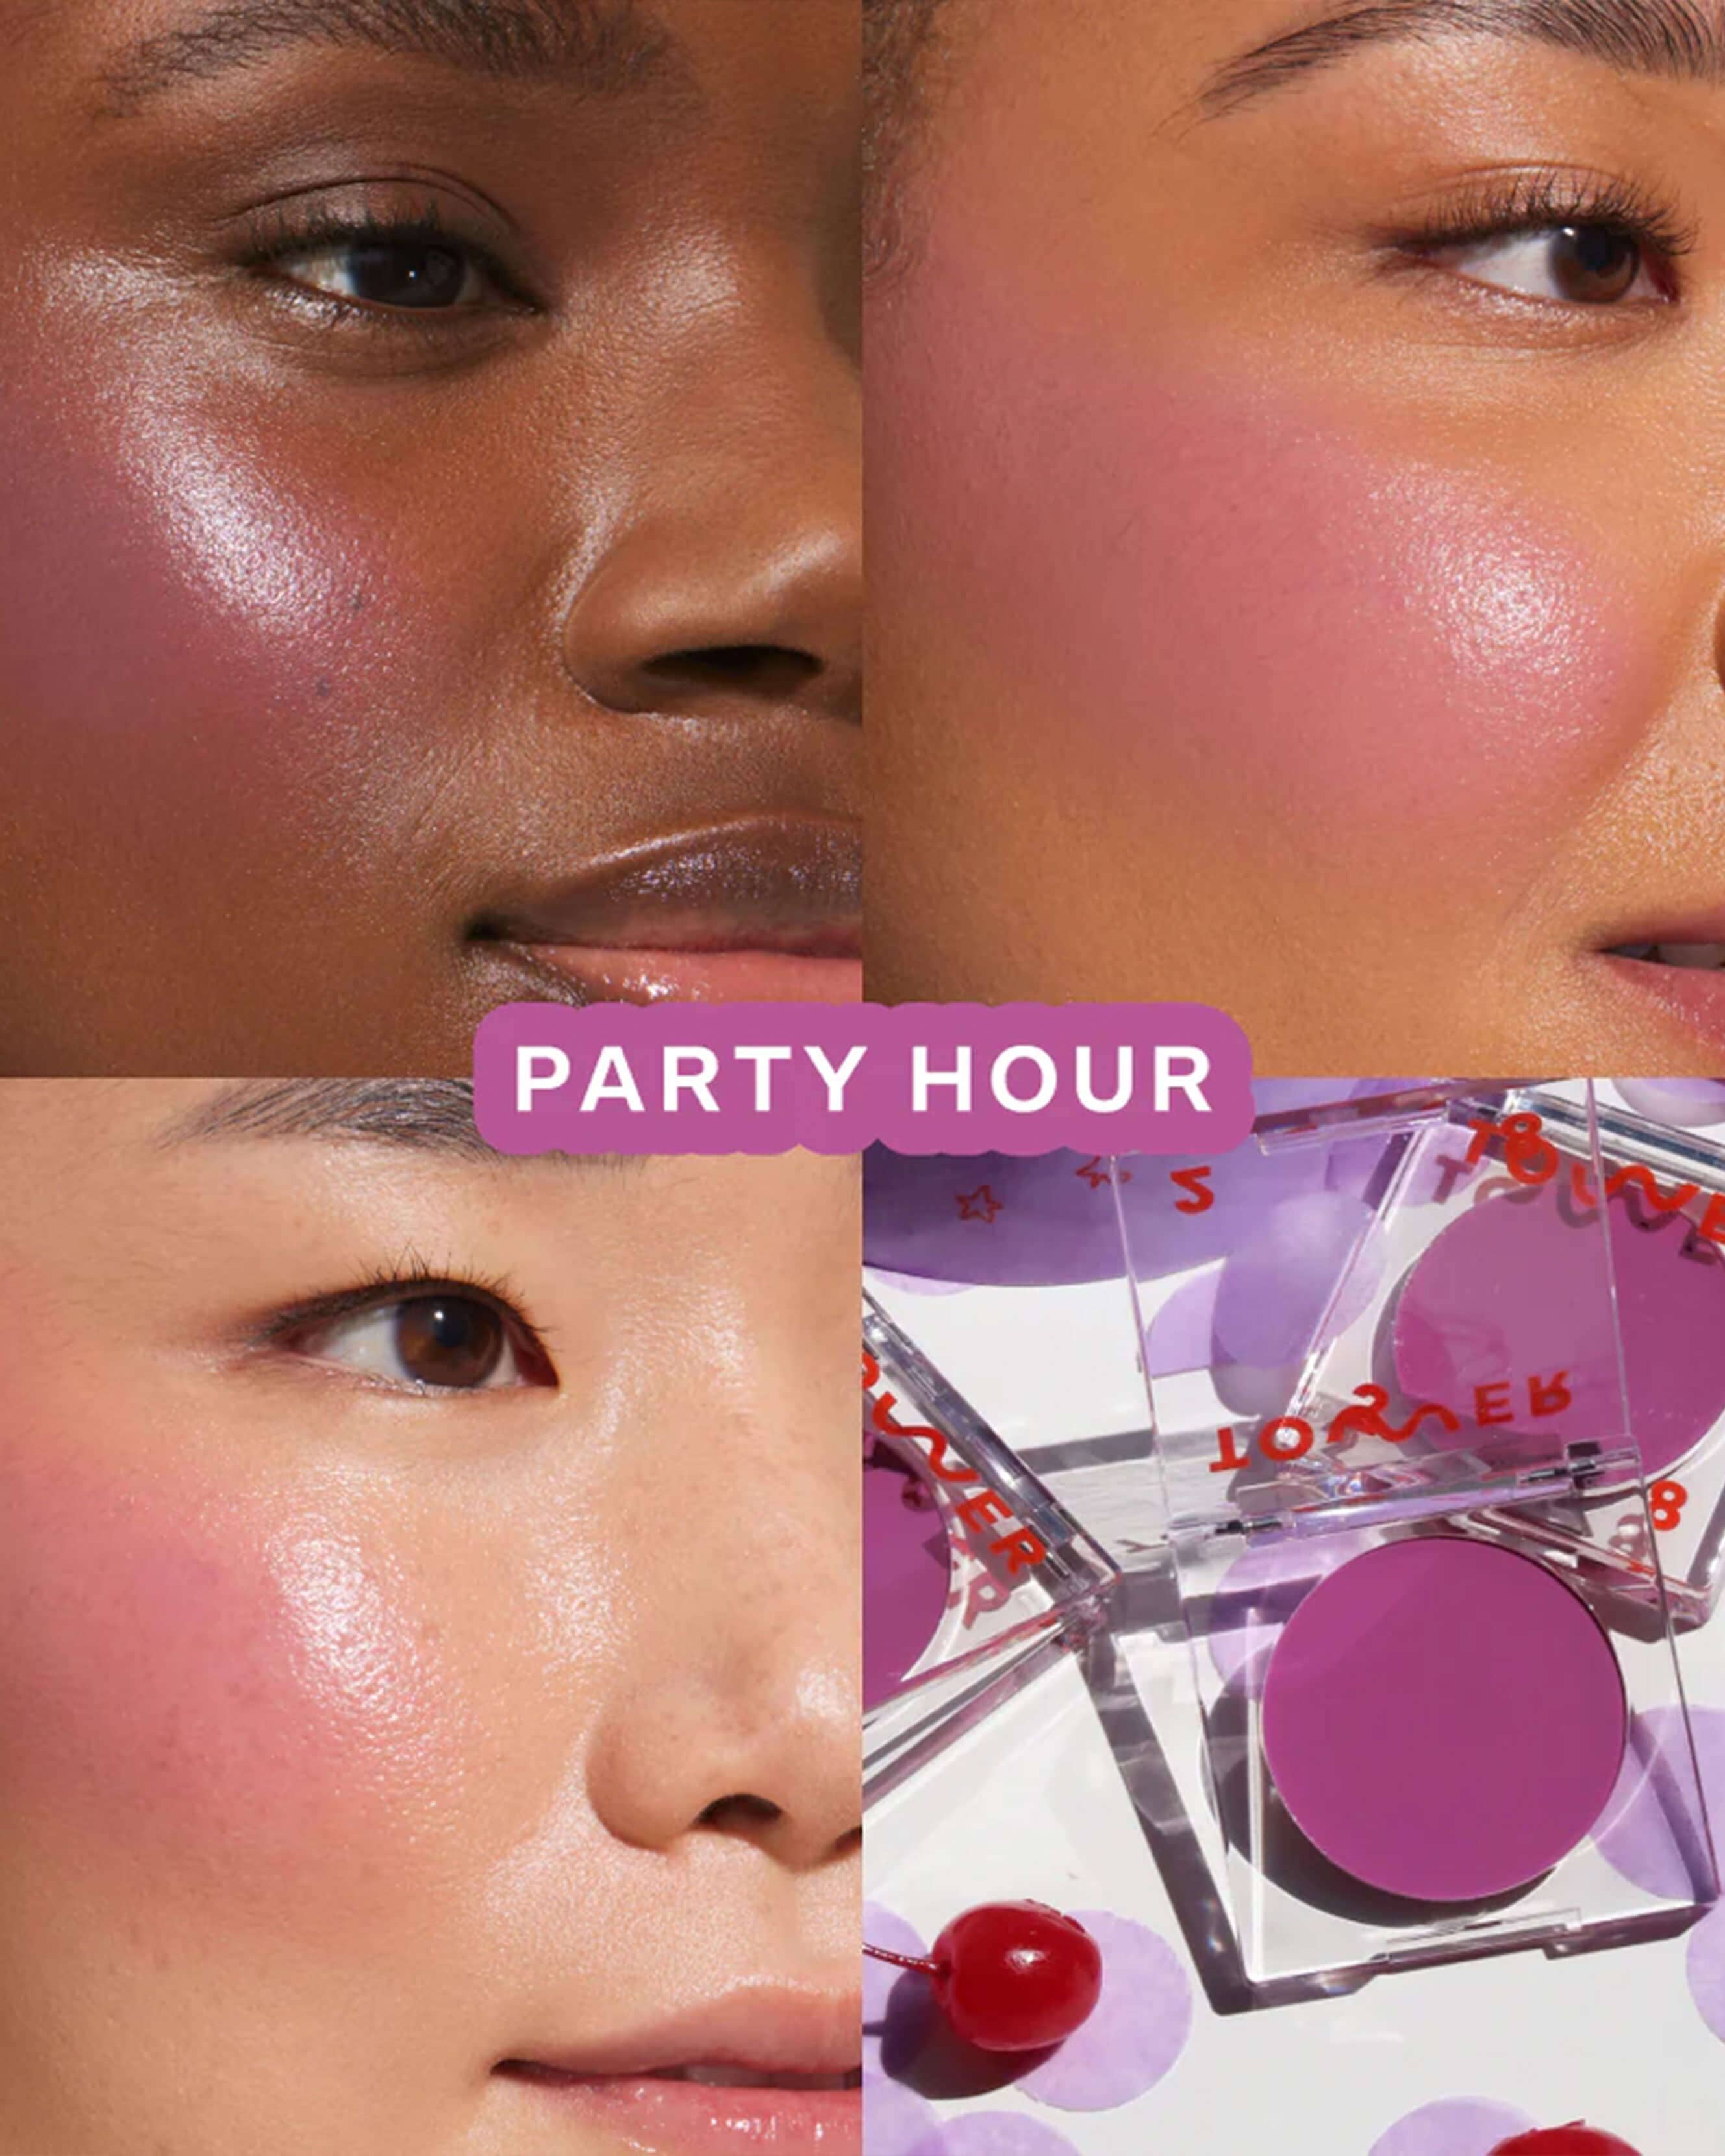 Party Hour (sun-kissed lavender pink)